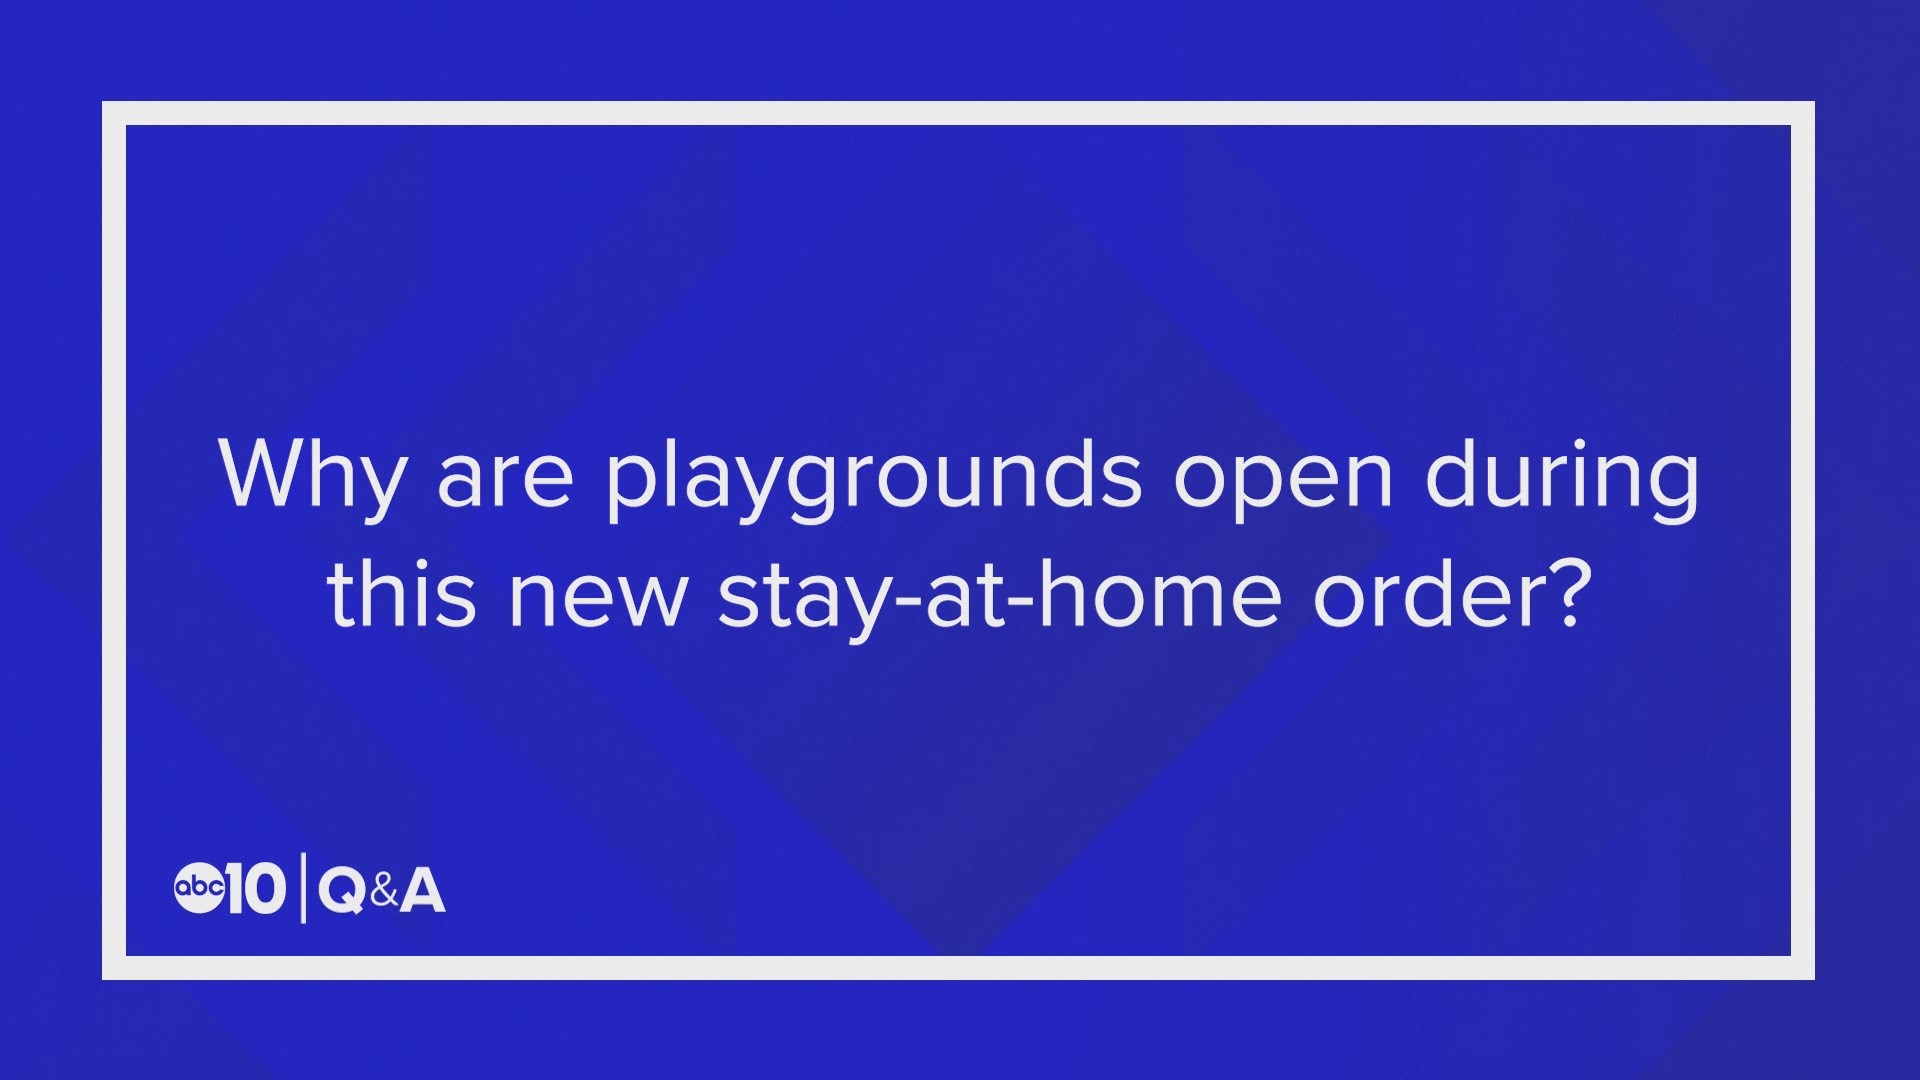 The City of Sacramento Director of Youth and Parks explains why playgrounds are still open during stay-at-home orders and what people should know before going.